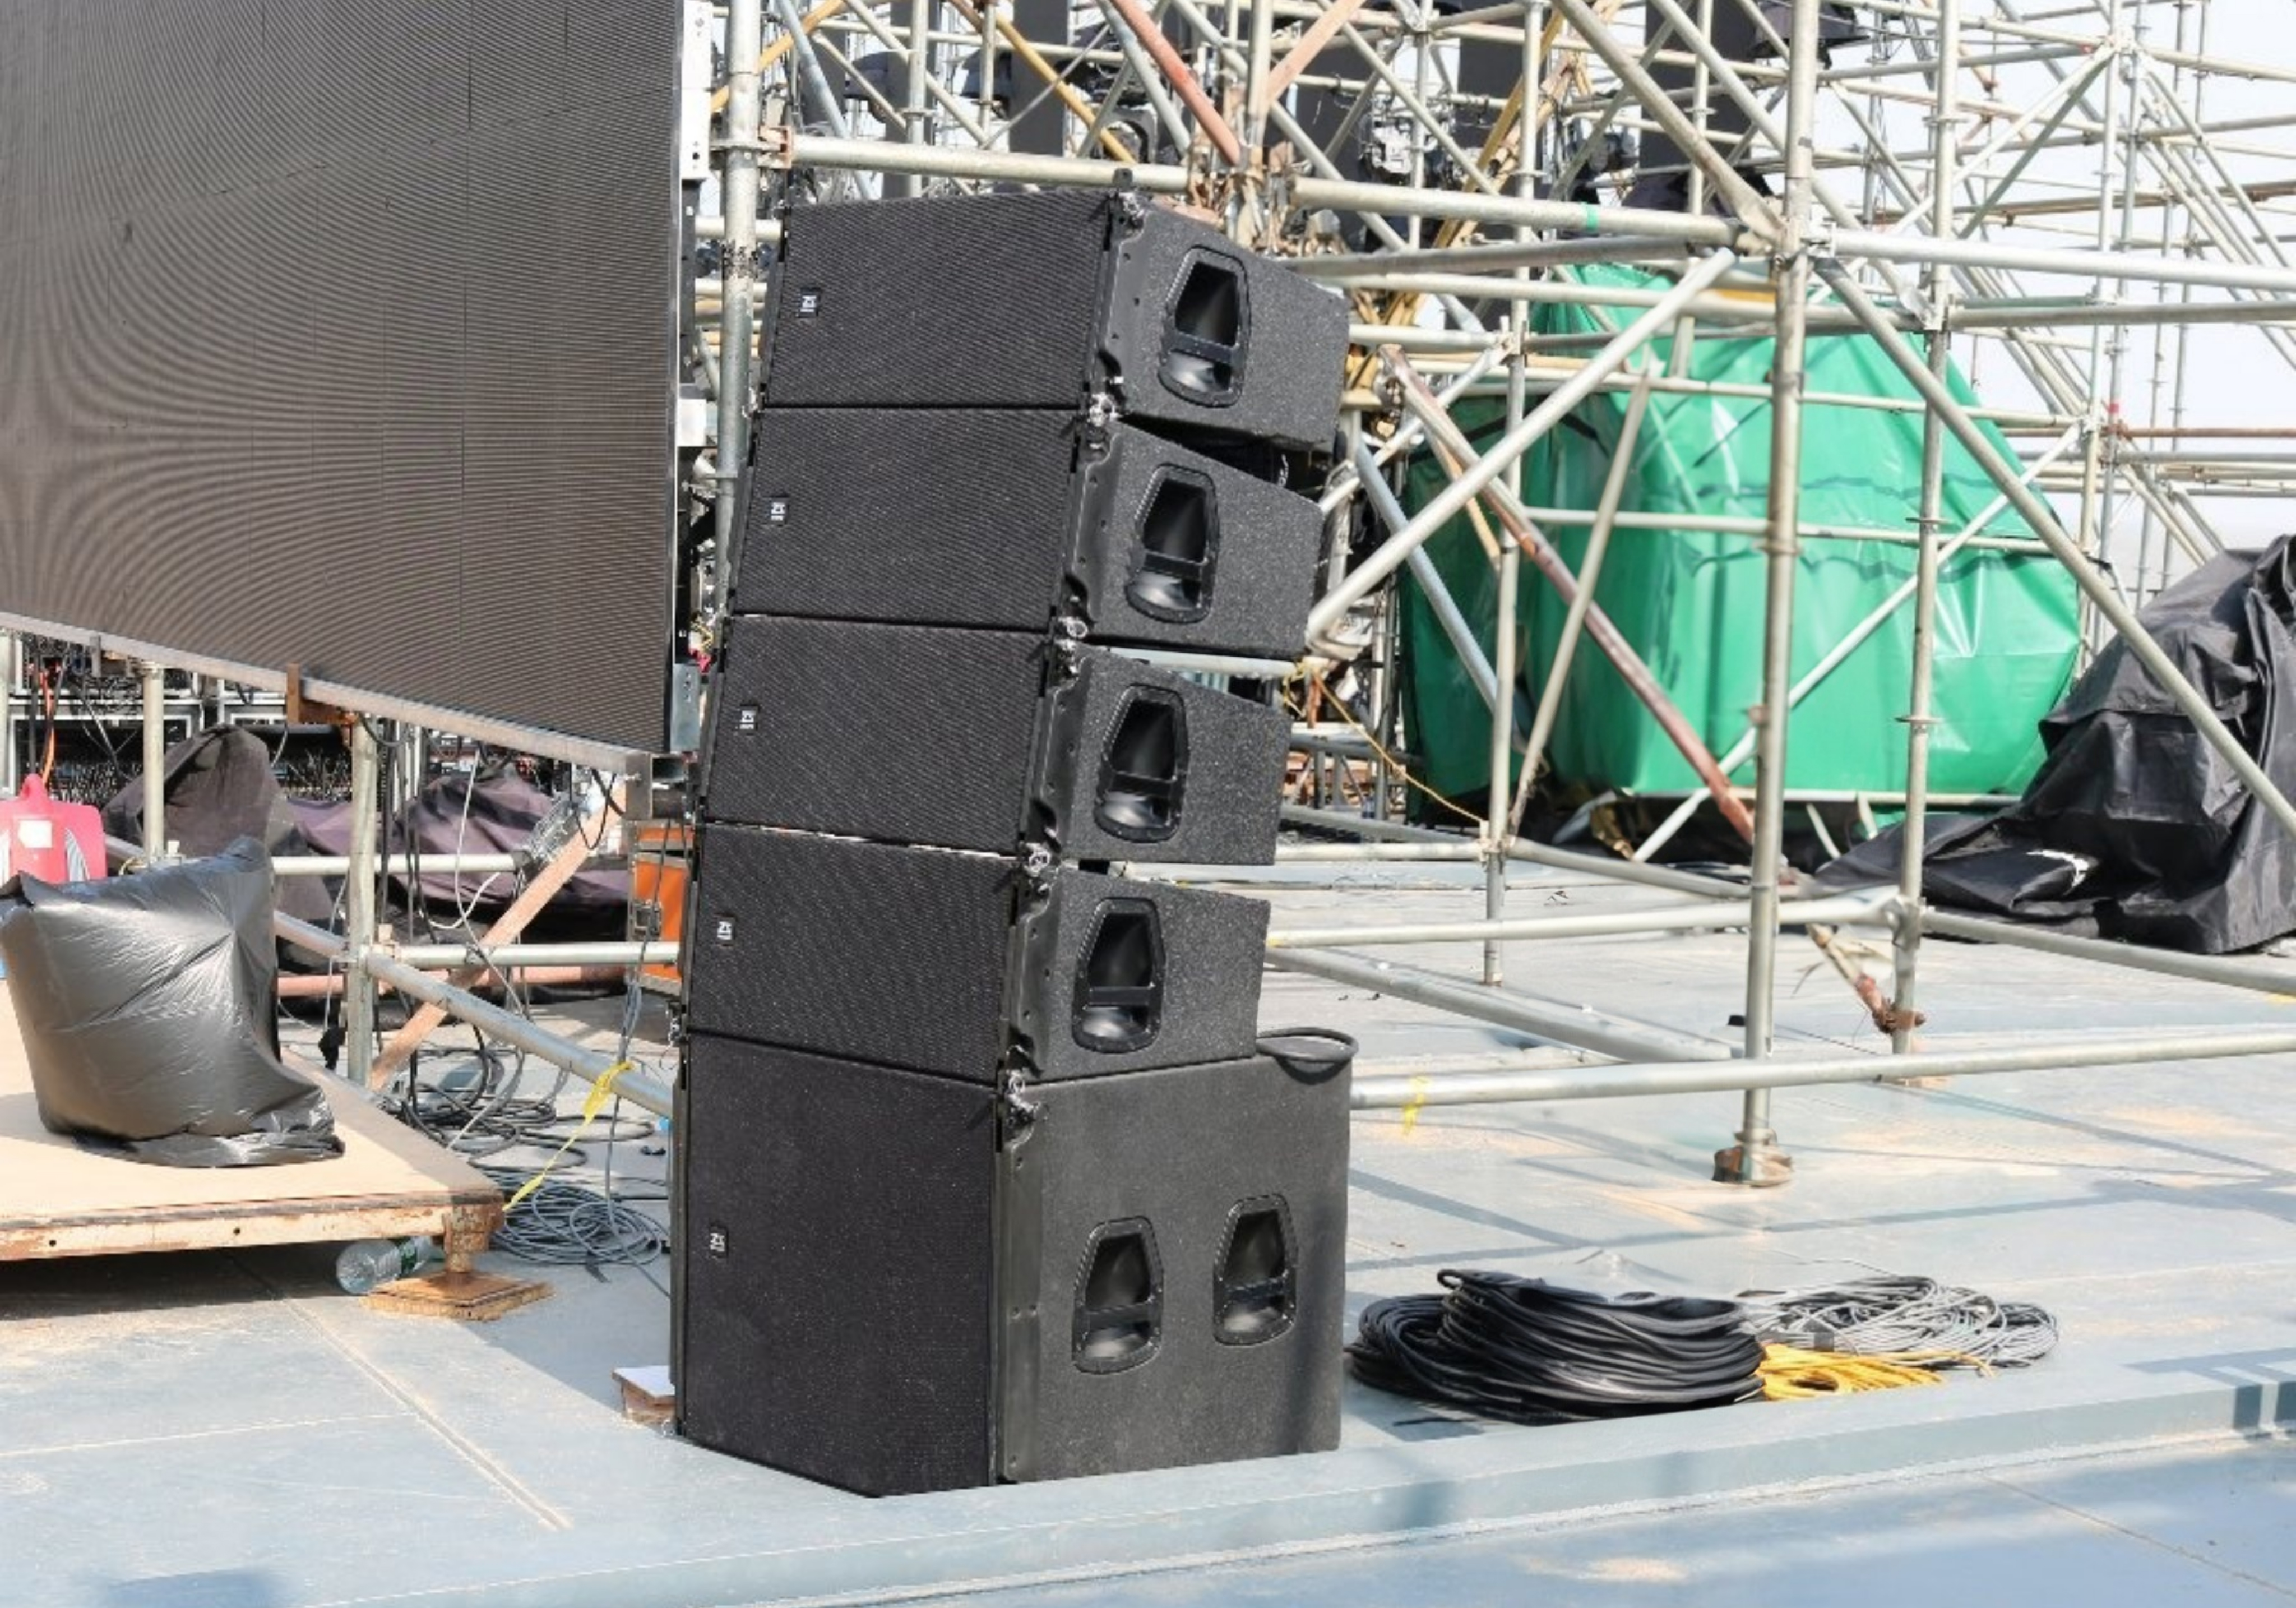 ZSOUND's VCM and VCS line array system at the Beach outdoor show